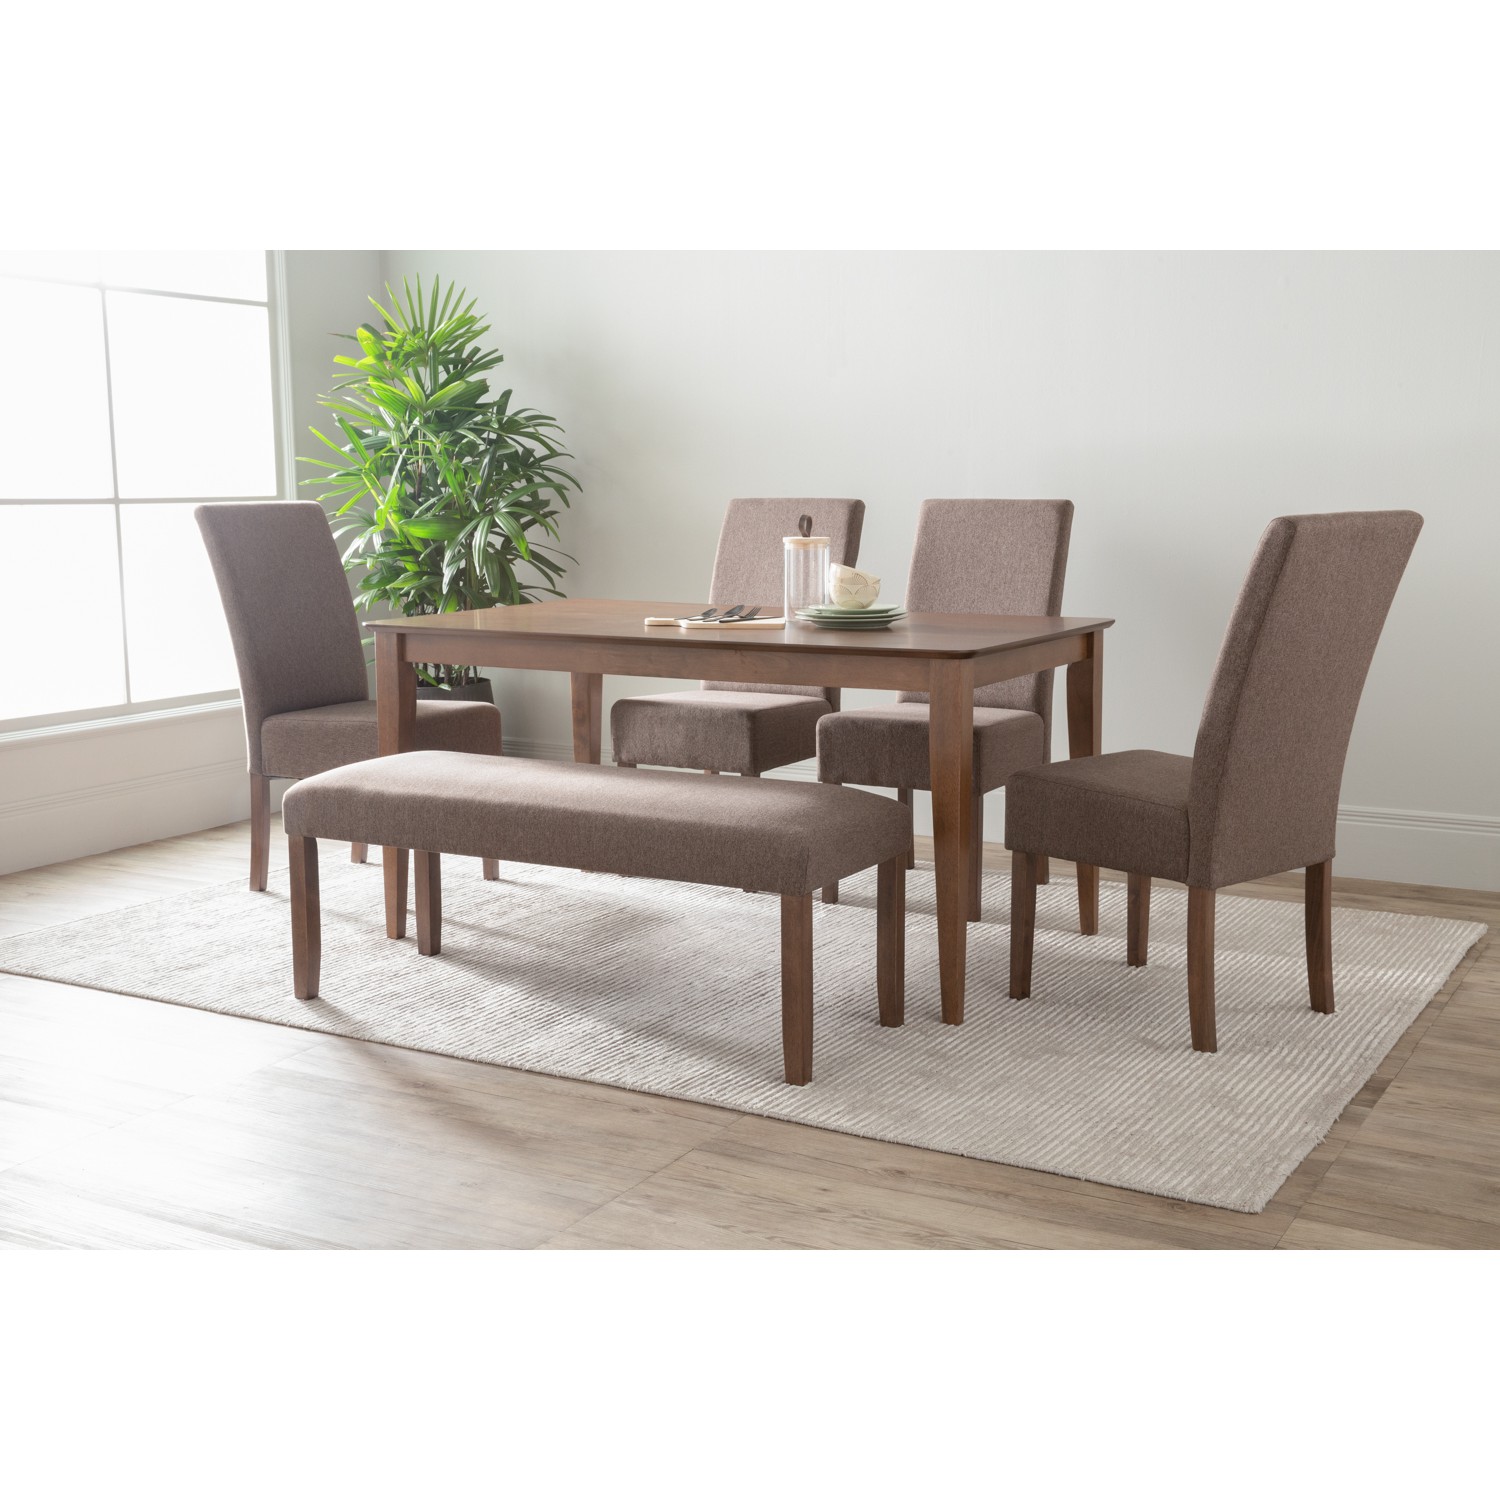 ALLEGRO 900X1500 DINING TABLE 109